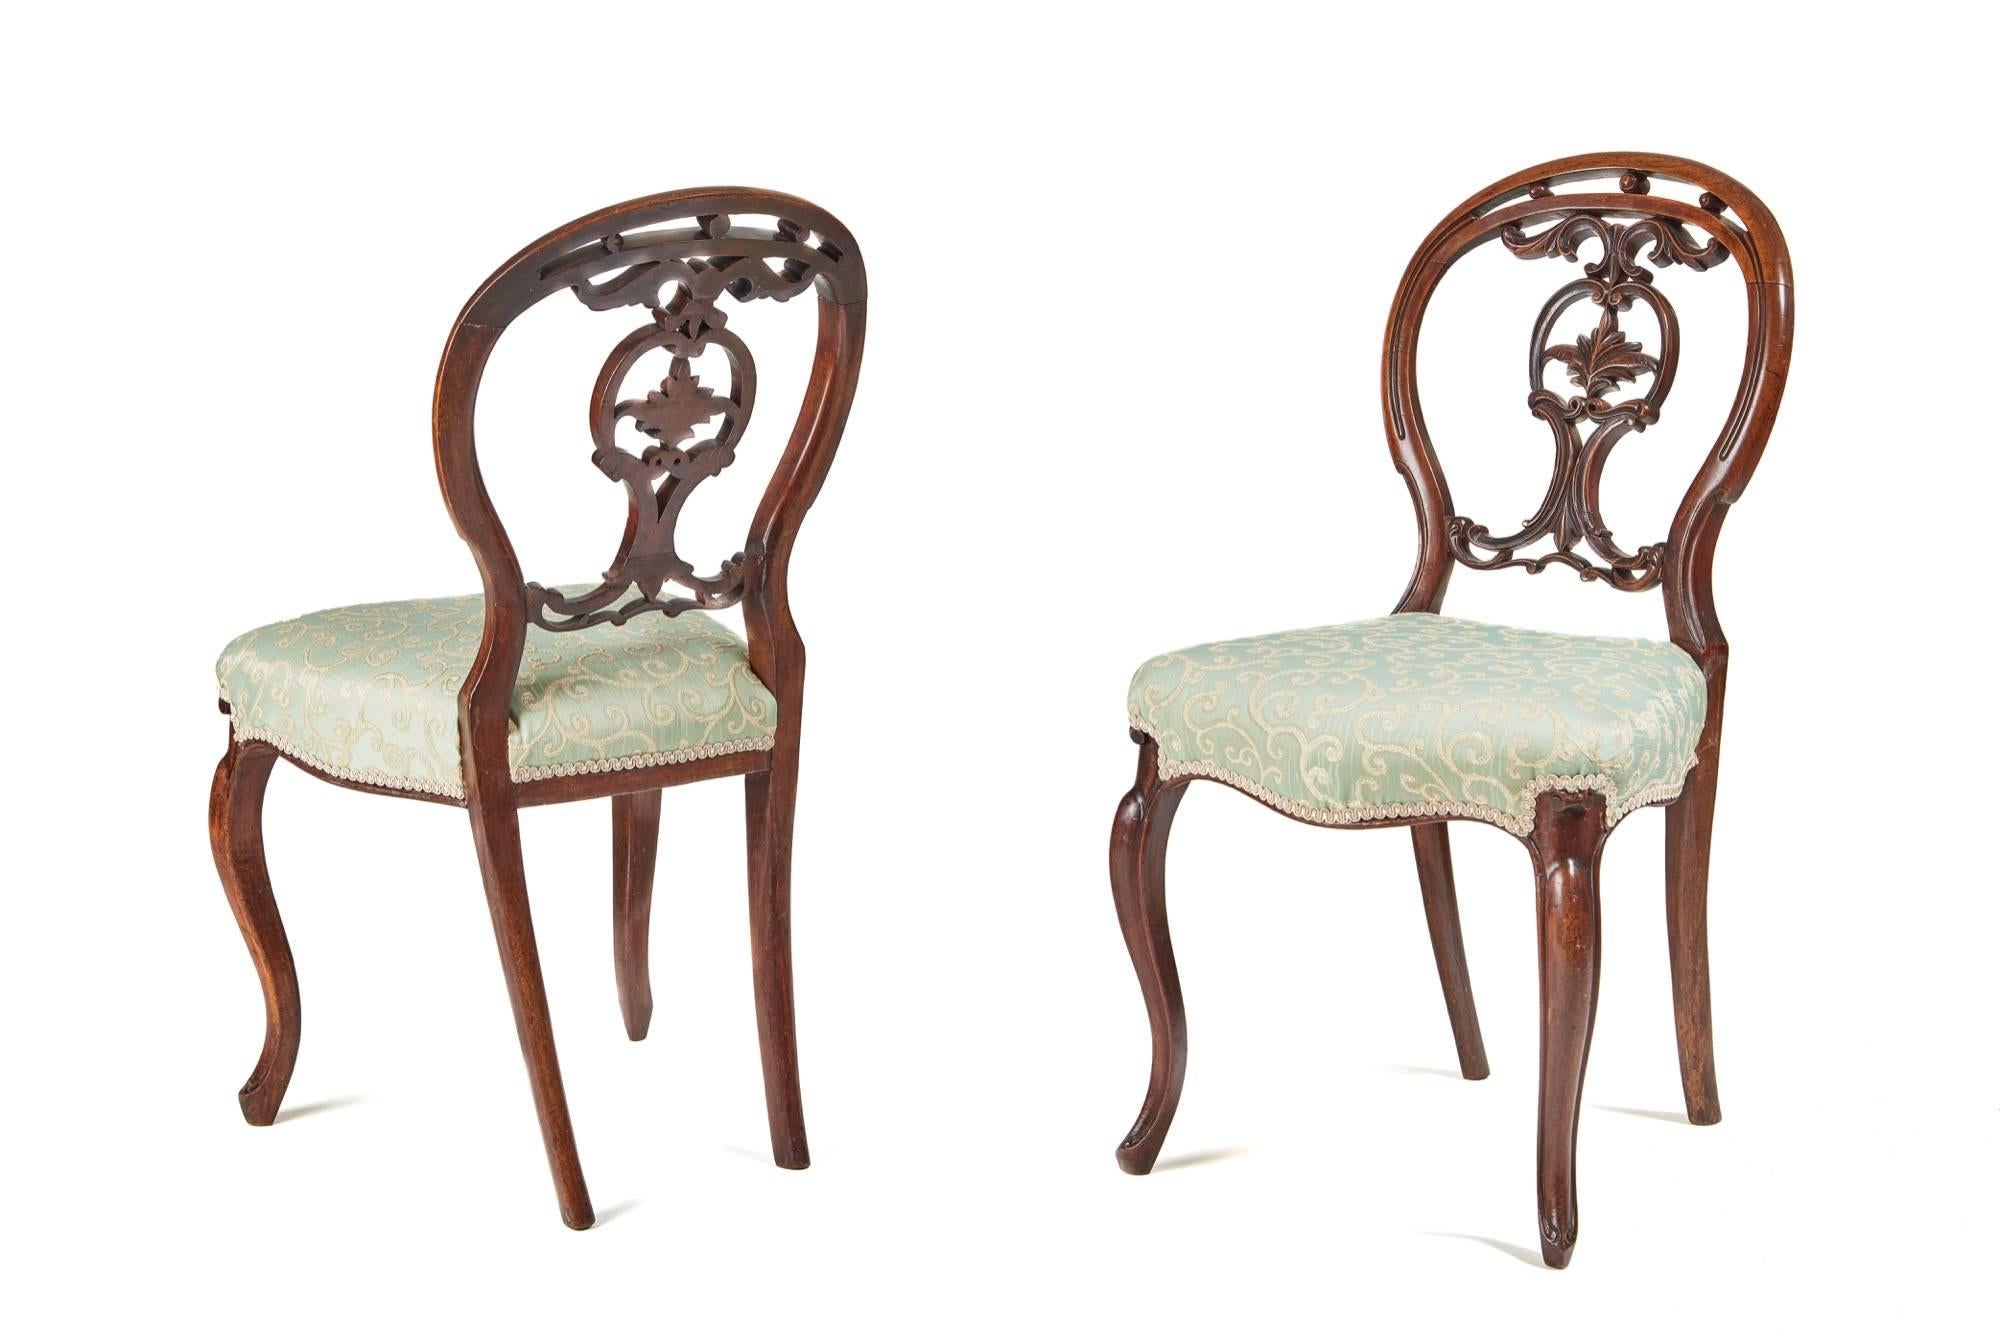 An elegant set of six Victorian walnut dining chairs, the balloon back having a nice carved centre, the seats are serpentine fronted and rest on a cabriole leg, the back legs are outswept these chairs have been newly re-upholstered.